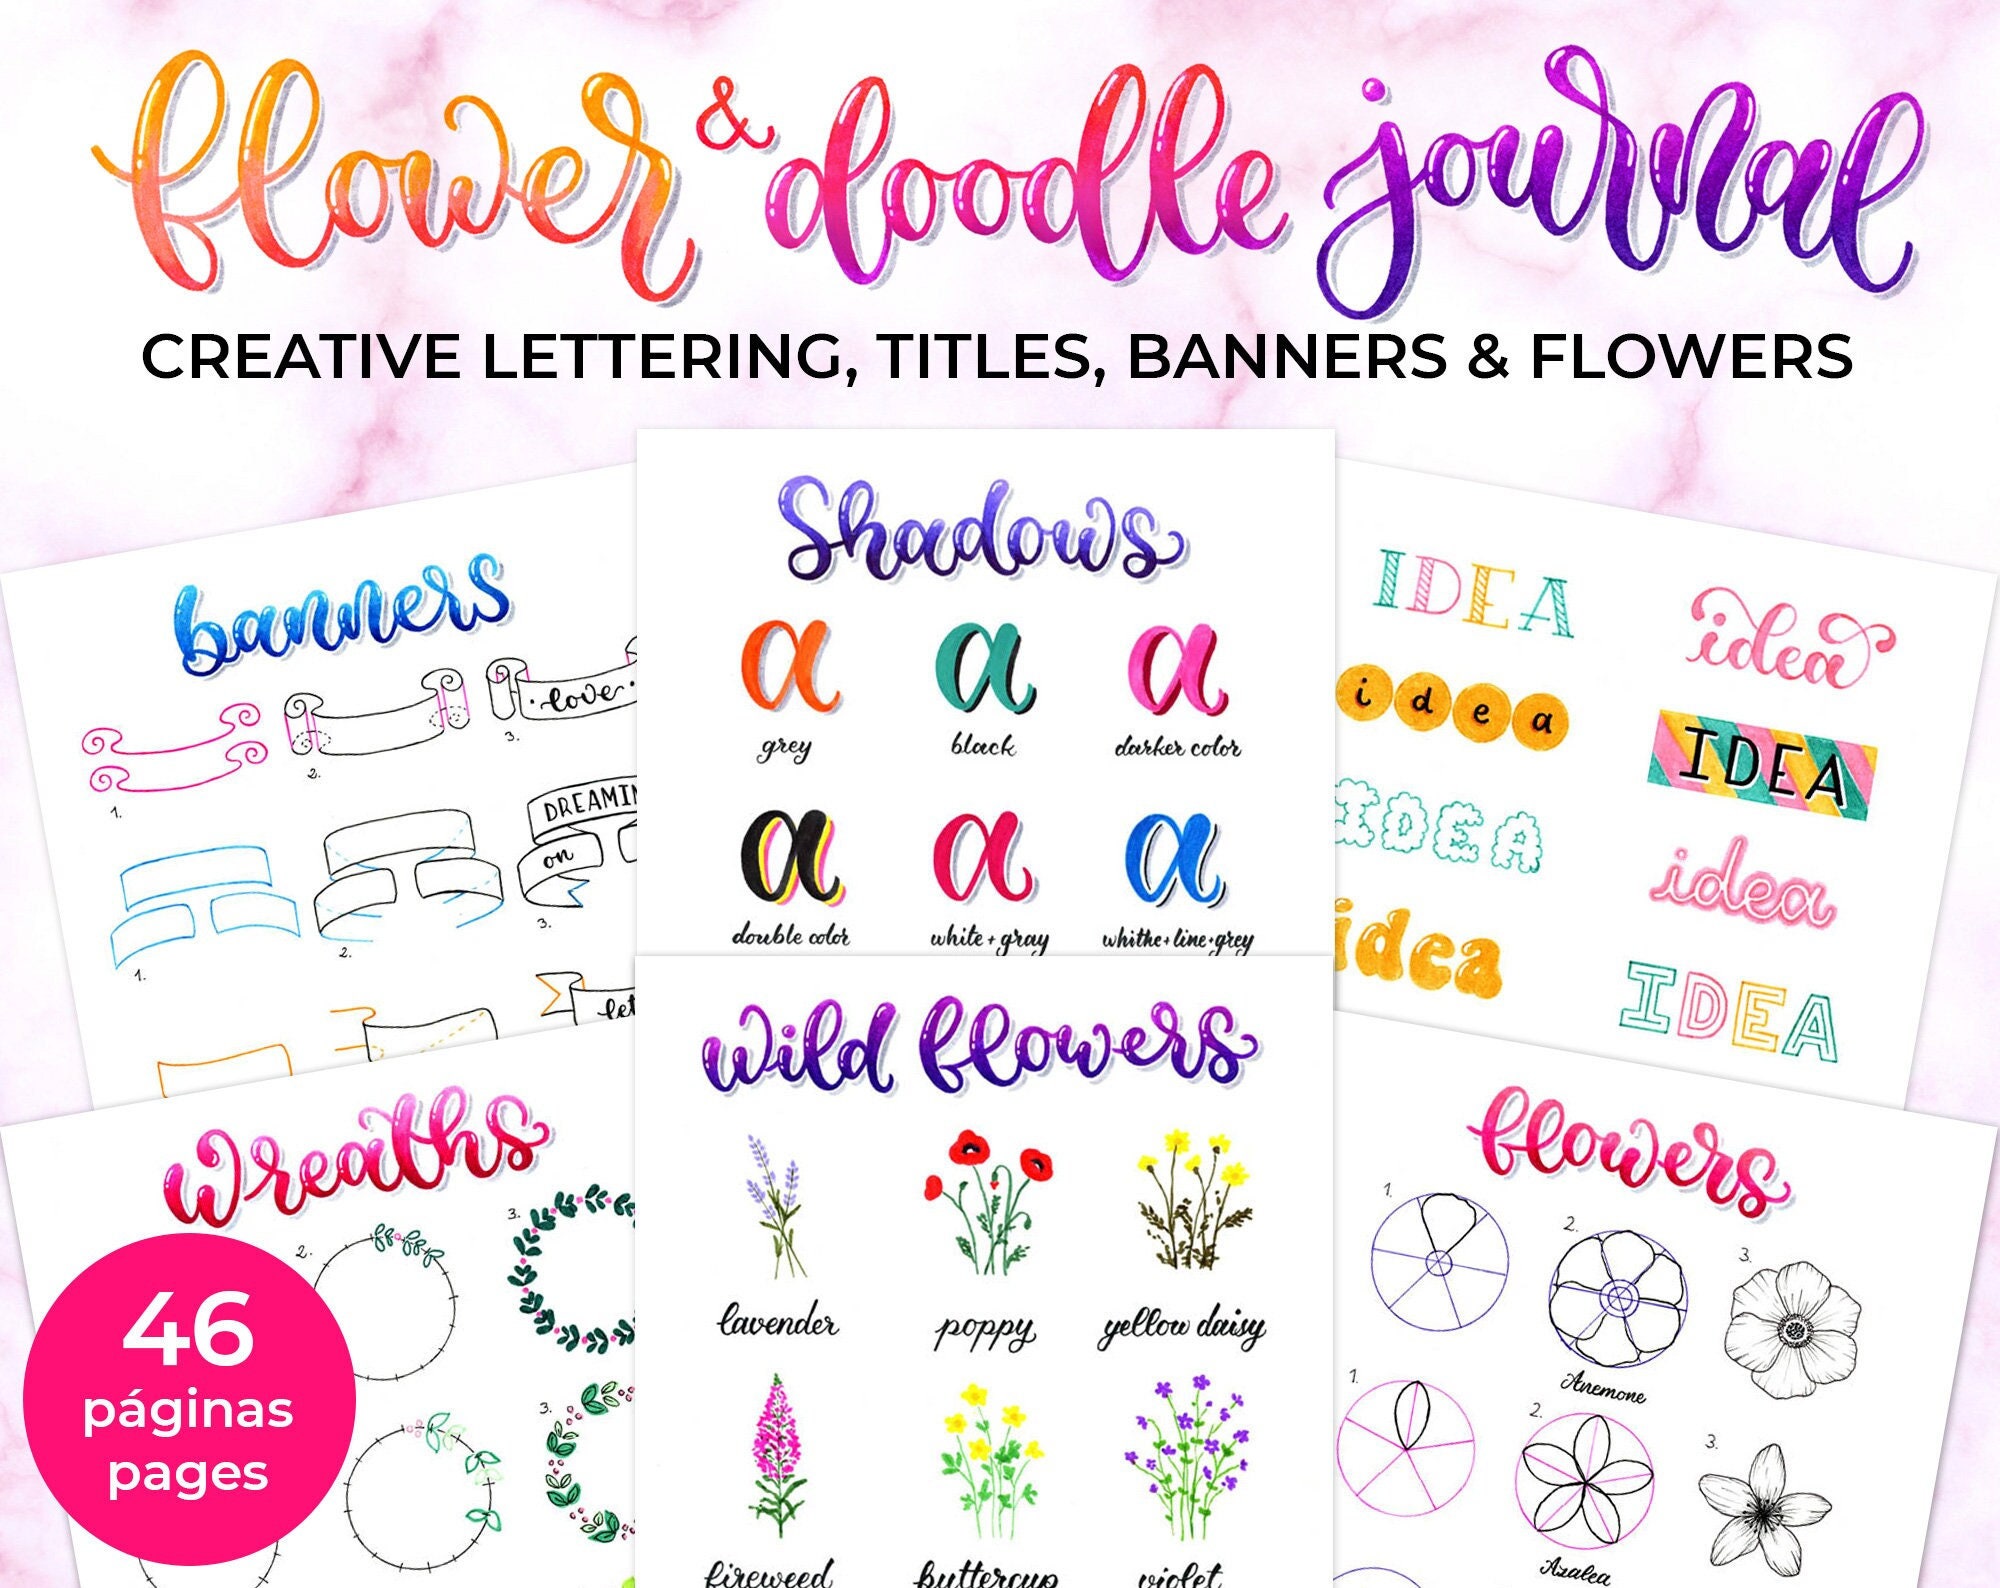 Creative Lettering Workbook combining Doodles, Letters and Mixing